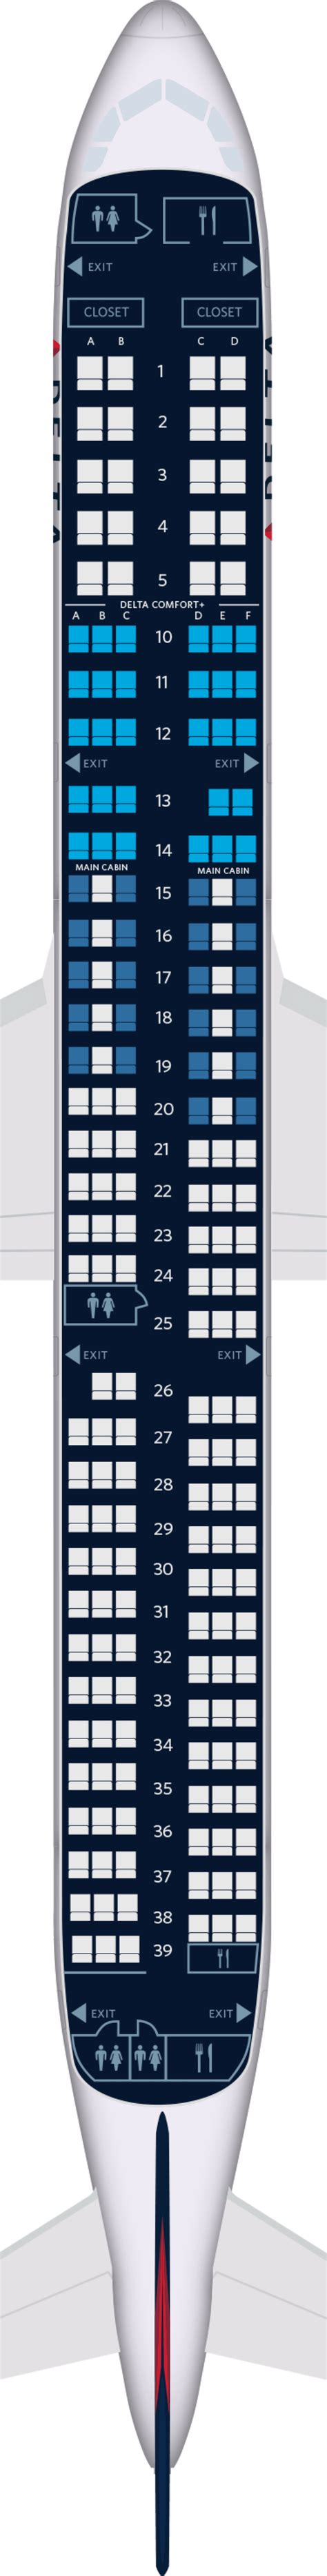 Planes & Seat Maps > Airbus A330-200 (332) Layout 4; Turkish Airlines Seat Maps. Airbus A330-200 (332) Layout 4 ... Airbus A319 (319) Airbus A320 (320) Airbus A321 (321) Layout 1; Airbus A321 (321) Layout 2; Airbus A321neo (321) Airbus A321neo ACF (321) Airbus A330-200 (332) Layout 1; Airbus A330-200 (332) Layout 2; ... View map: …. 